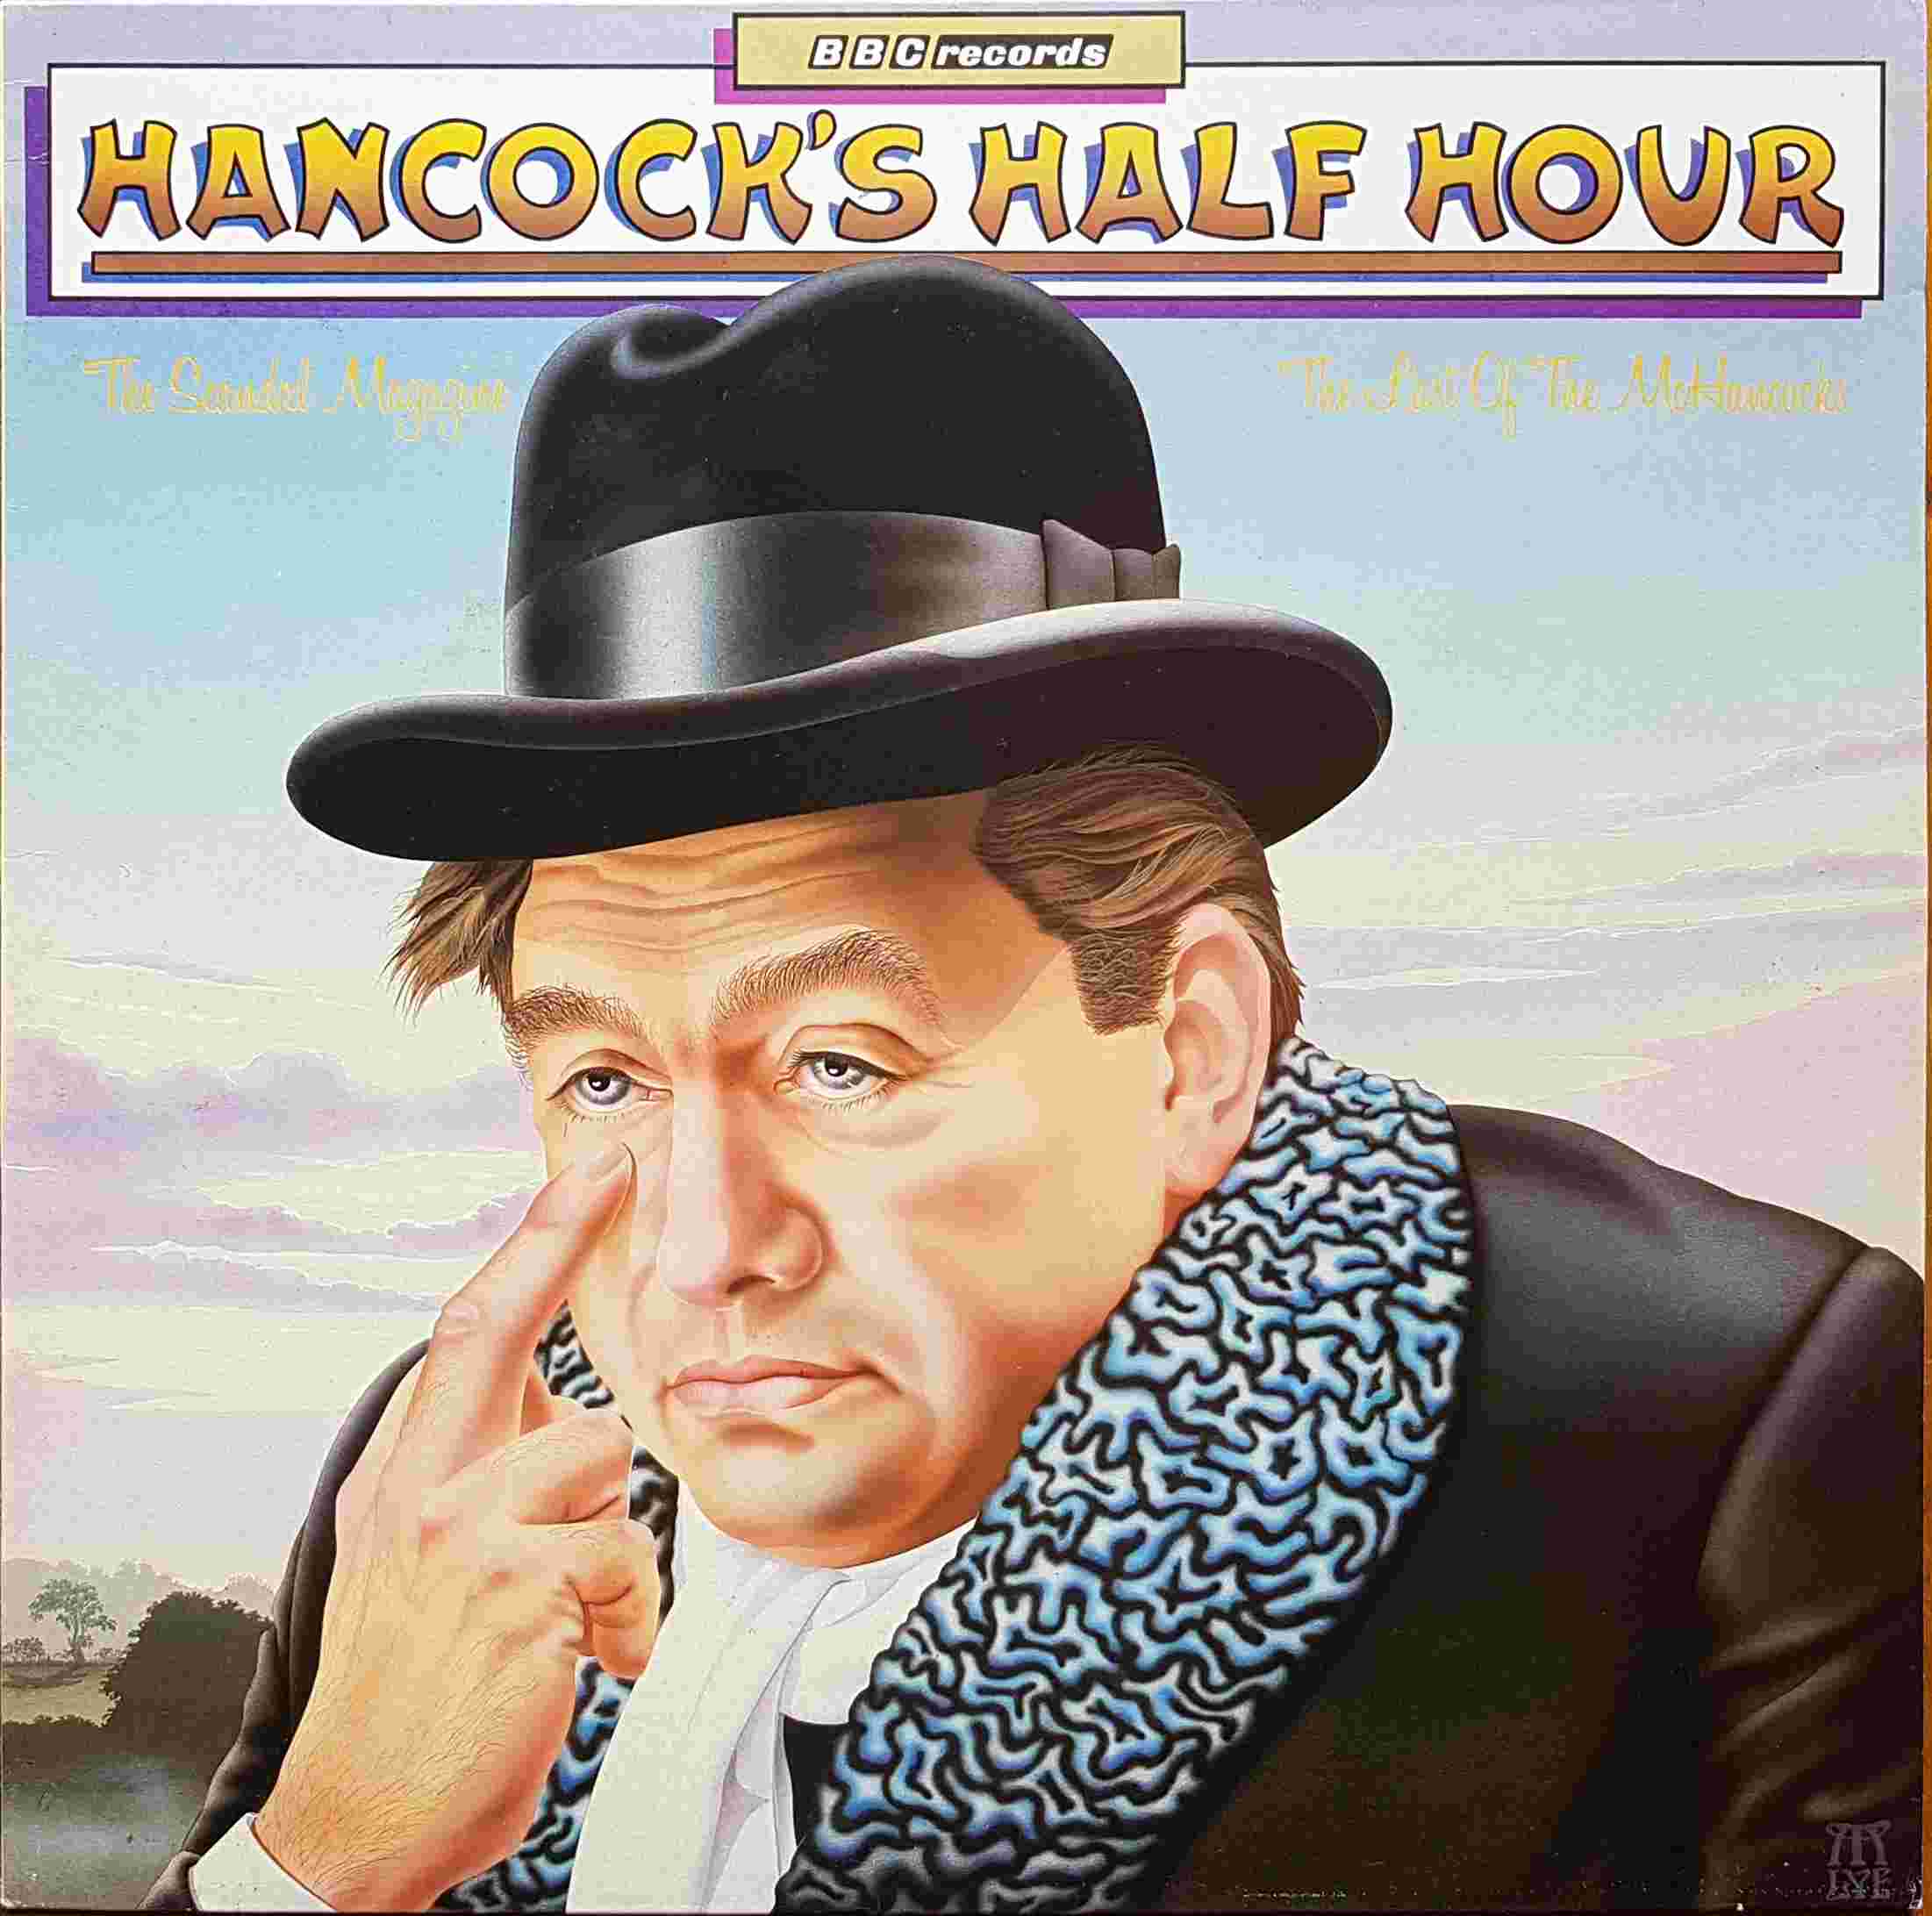 Picture of REB 451 Hancock's half hour - Volume 3 by artist Tony Hancock from the BBC albums - Records and Tapes library